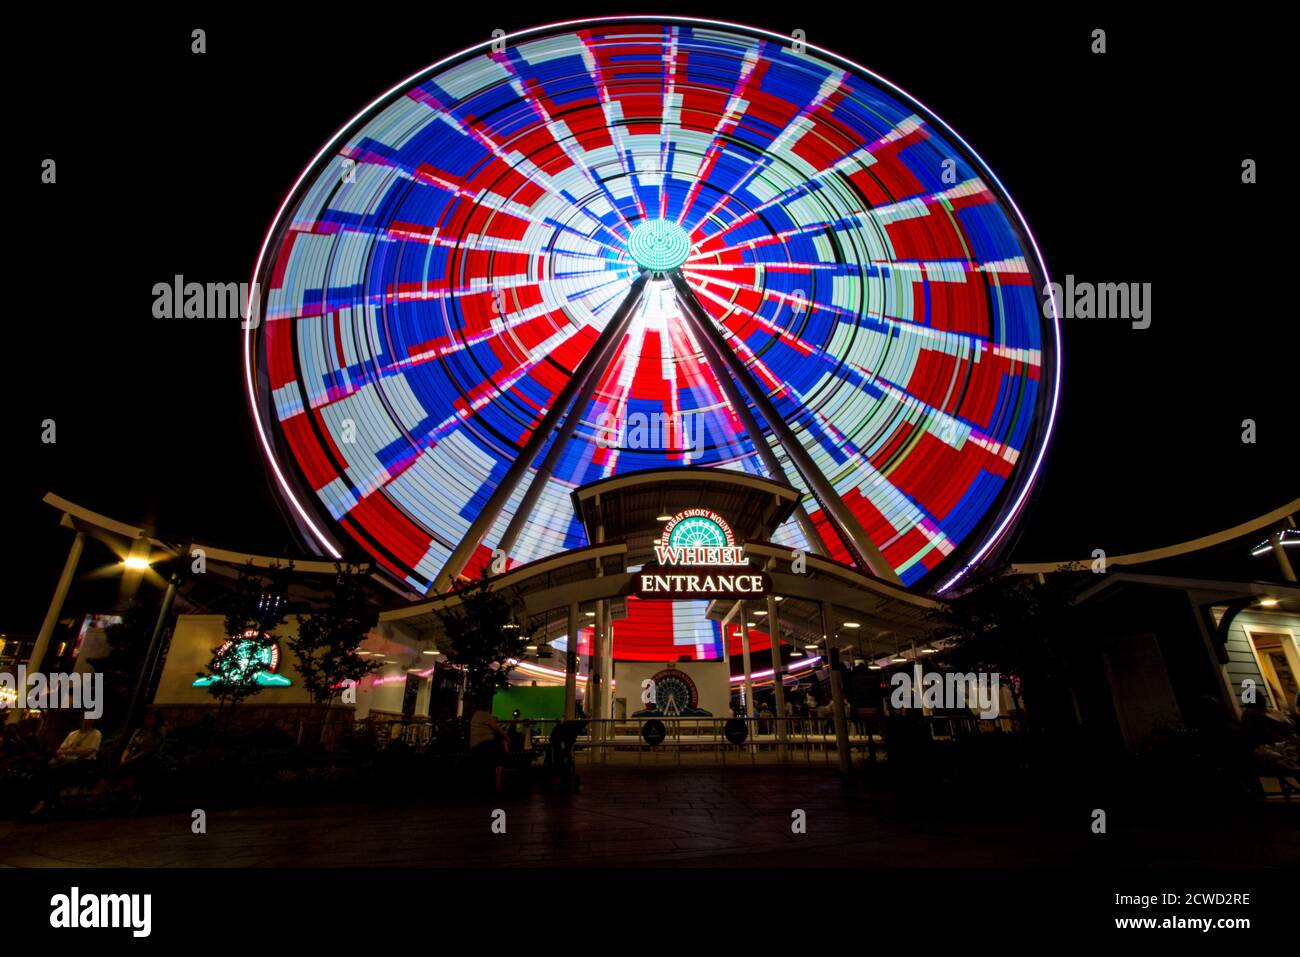 Pigeon Forge, Tennessee, USA - May 15, 2017: The Great Smoky Mountain Sky Wheel located at the Island amusement and shopping mall in Pigeon Forge. Stock Photo